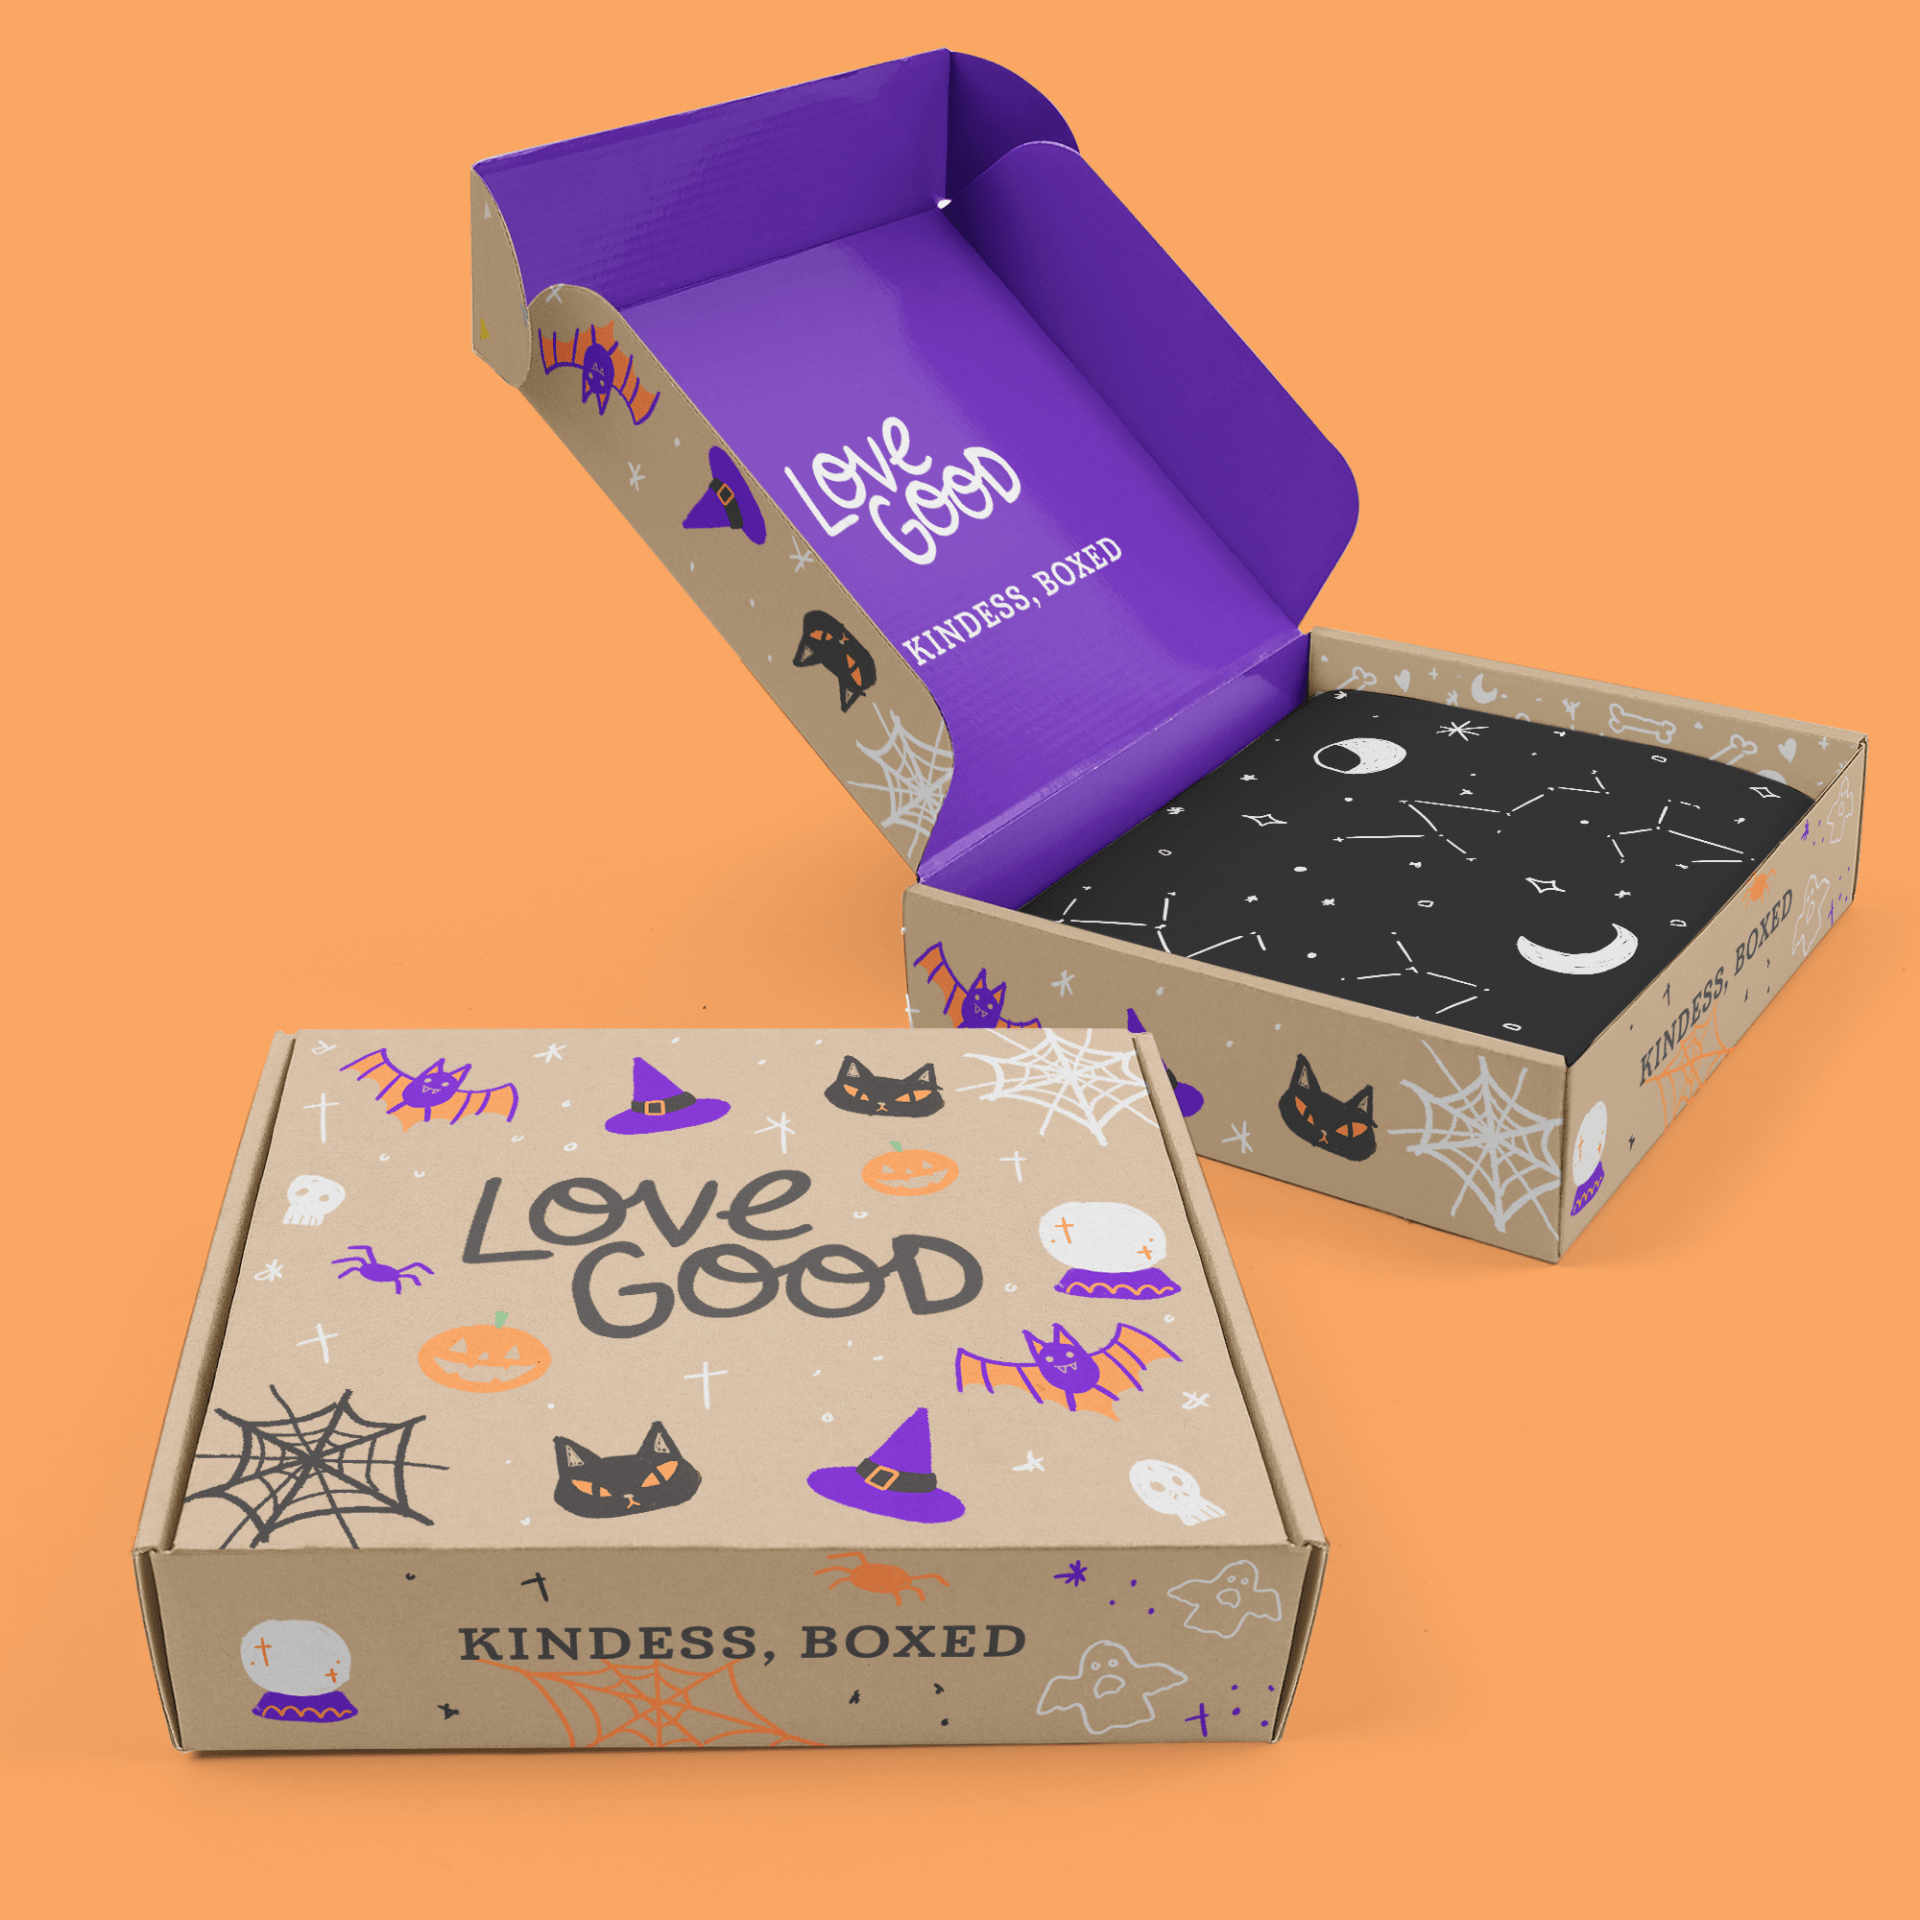 Subscription box packaging design: Halloween themed for October.